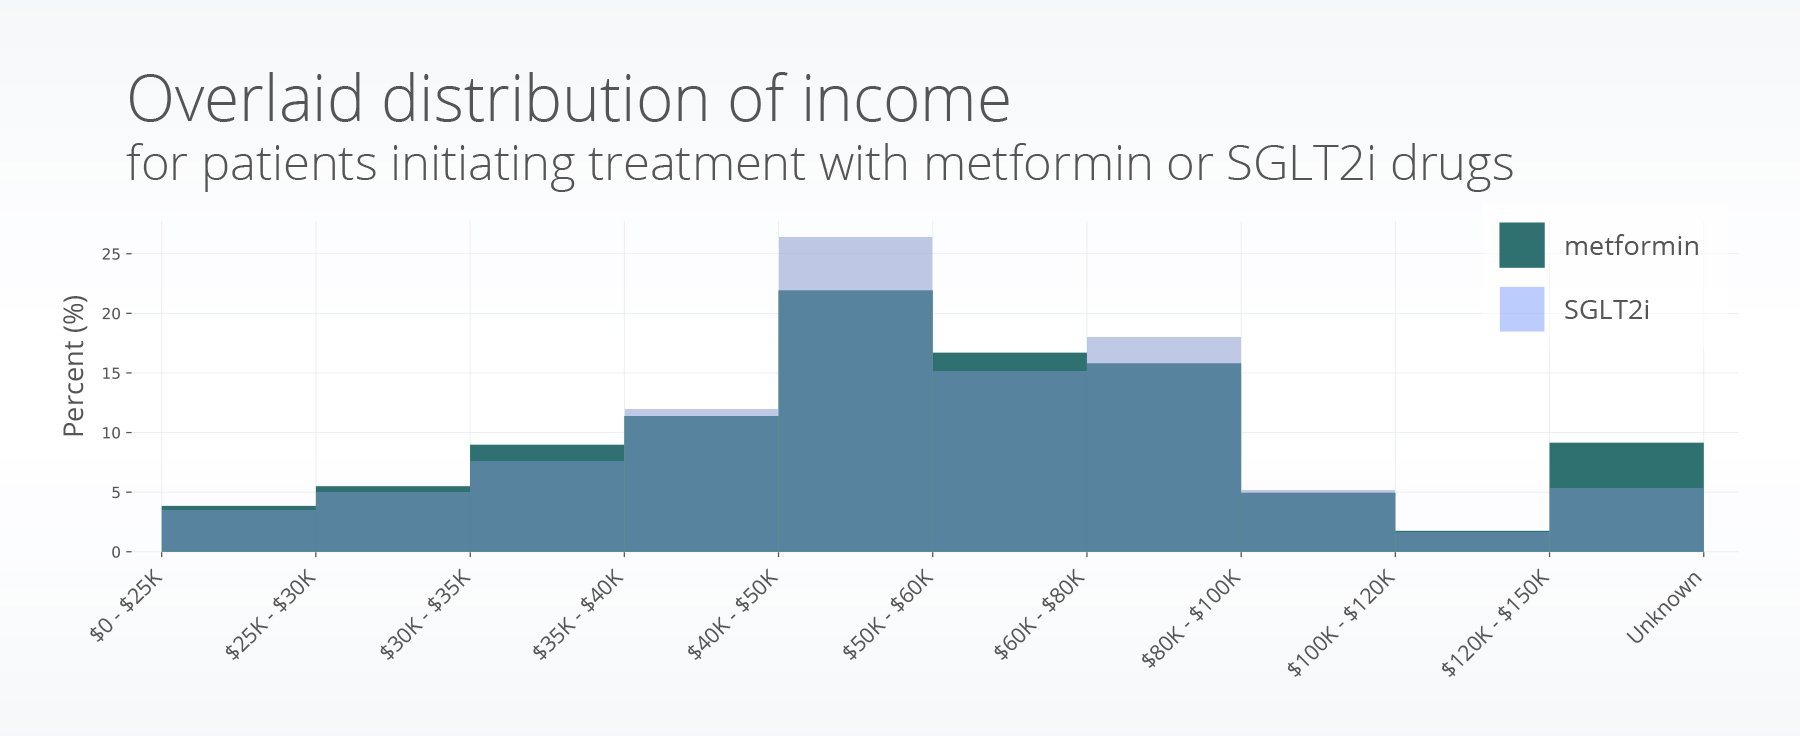 Overlaid distribution of income for patients initiating treatment with metformin or SGLT2i drugs